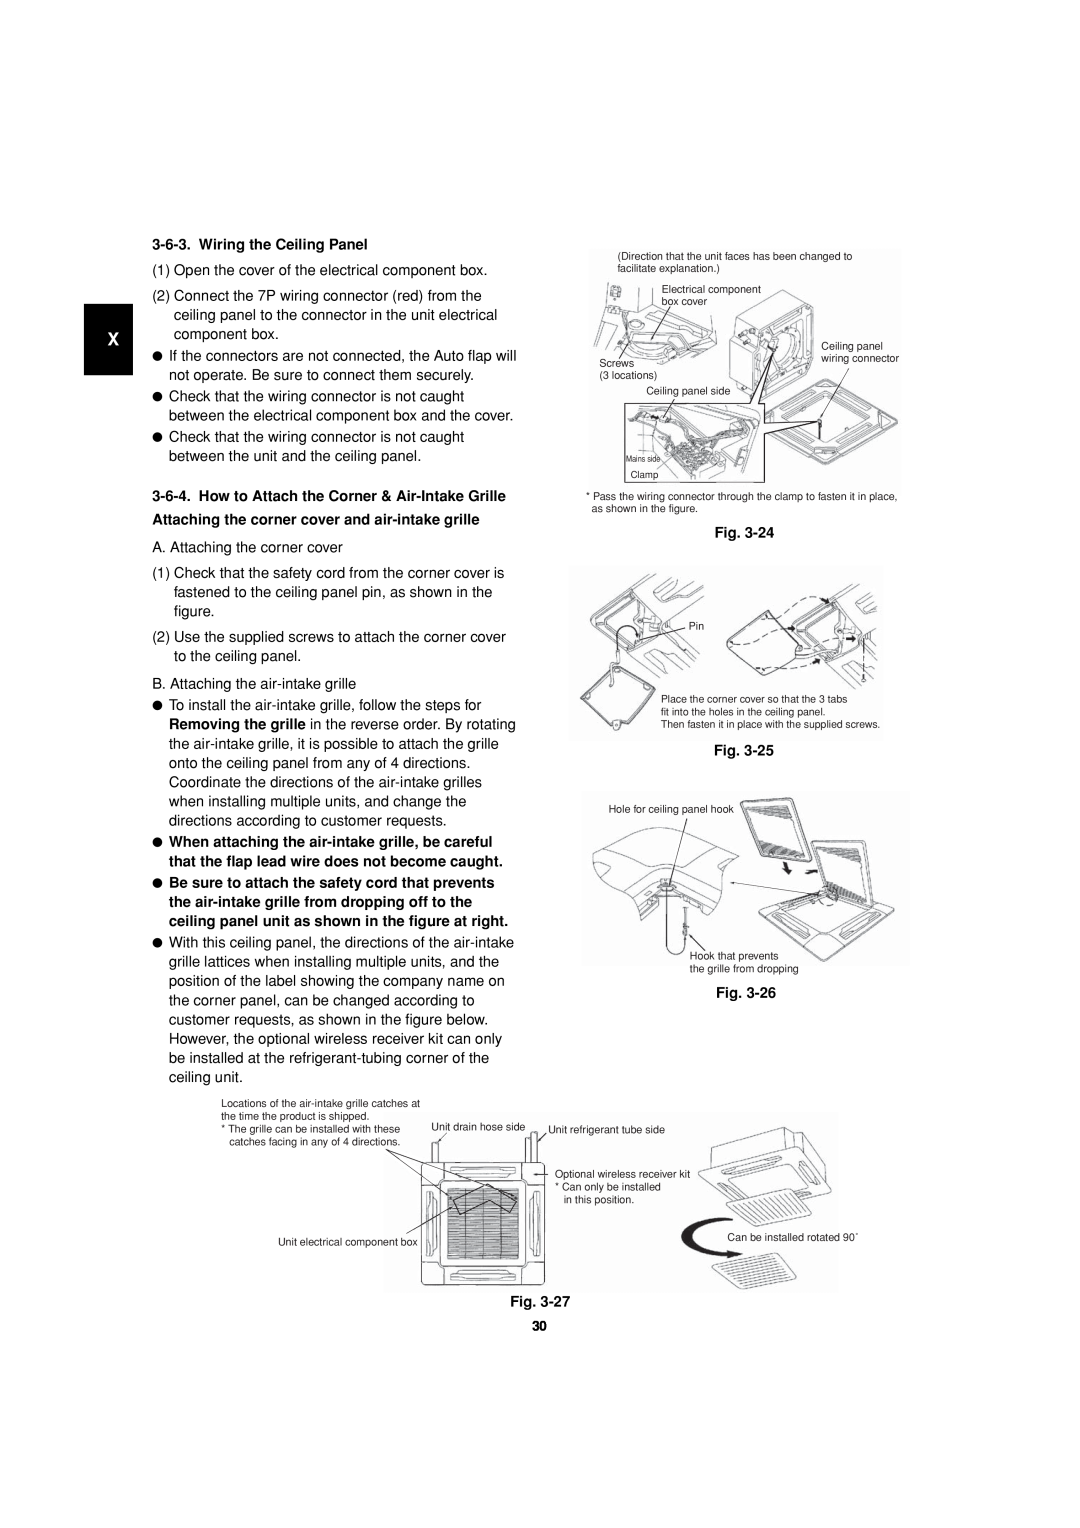 Sanyo 85464359981002 installation instructions Wiring the Ceiling Panel, How to Attach the Corner & Air-IntakeGrille, Fig 